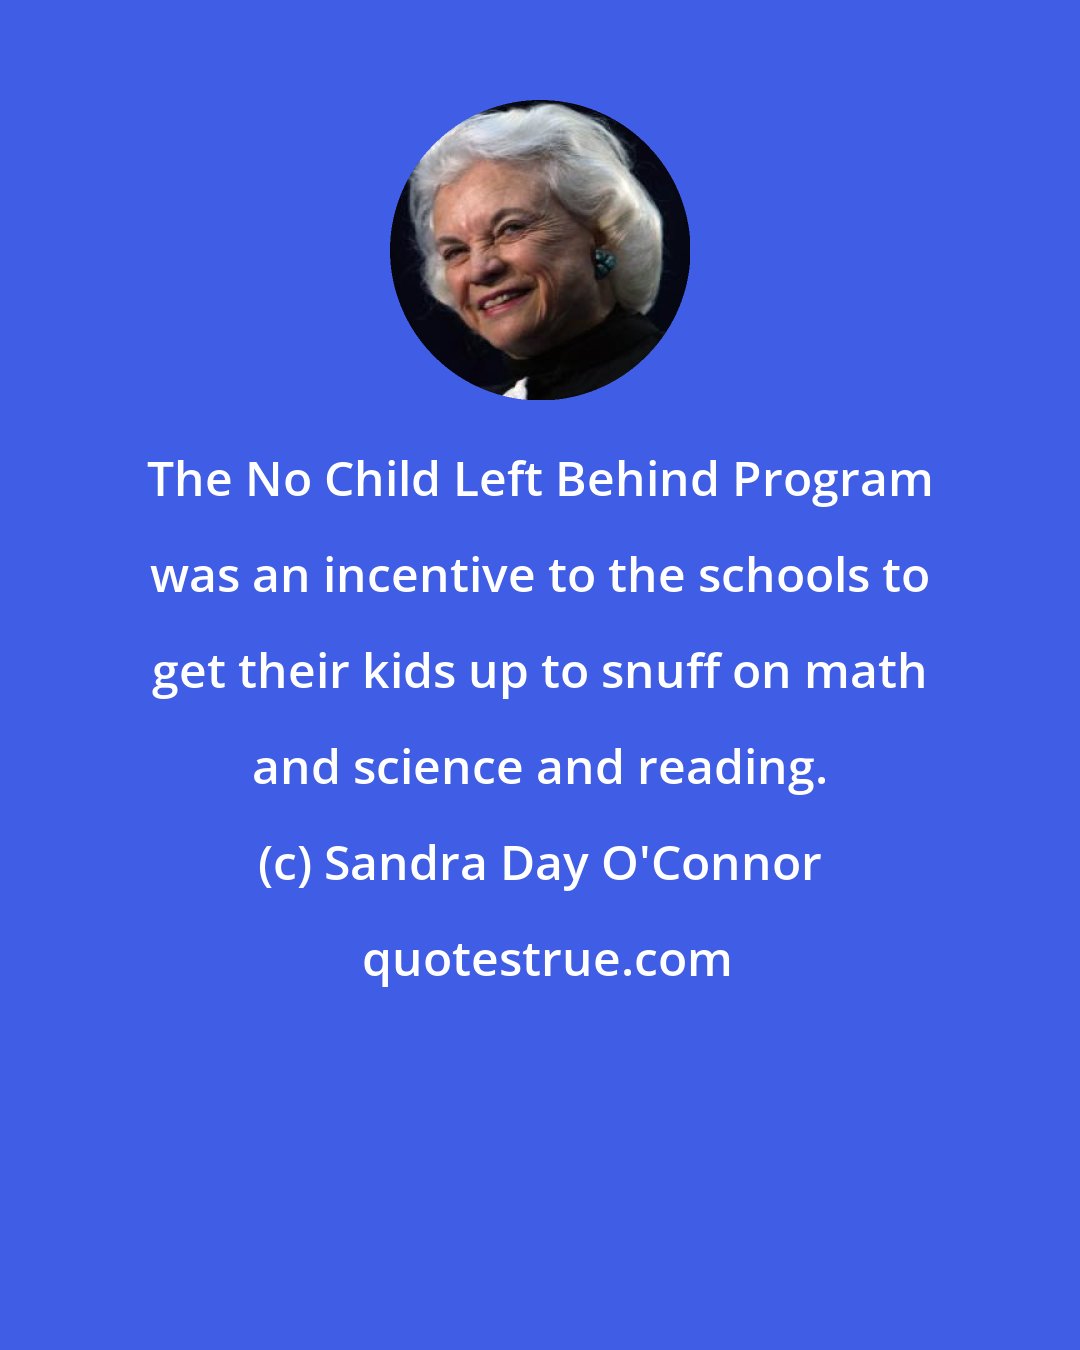 Sandra Day O'Connor: The No Child Left Behind Program was an incentive to the schools to get their kids up to snuff on math and science and reading.